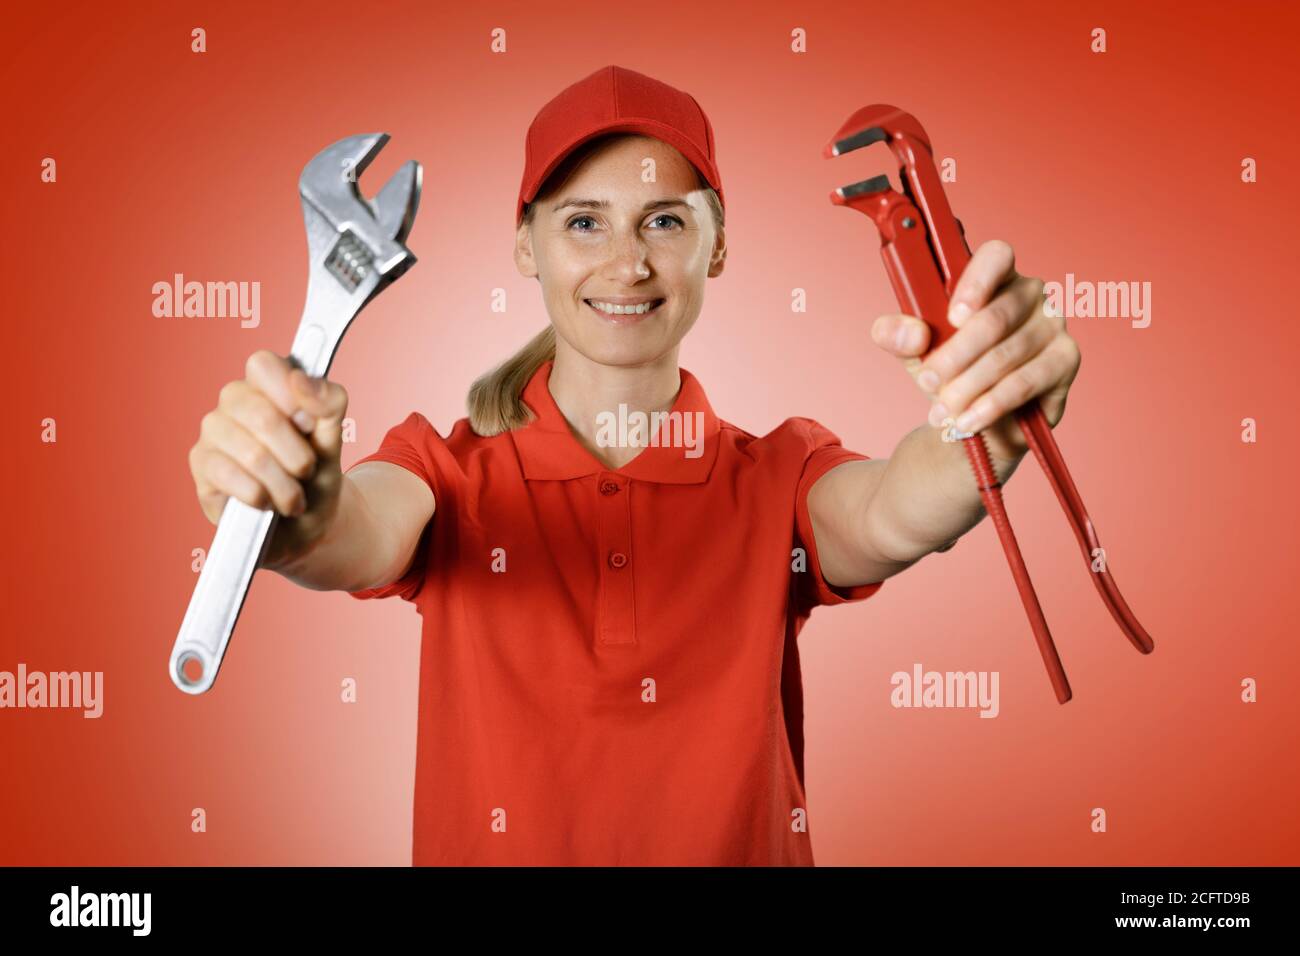 handyman services - handy woman in red uniform with repair tools in hands on red background Stock Photo